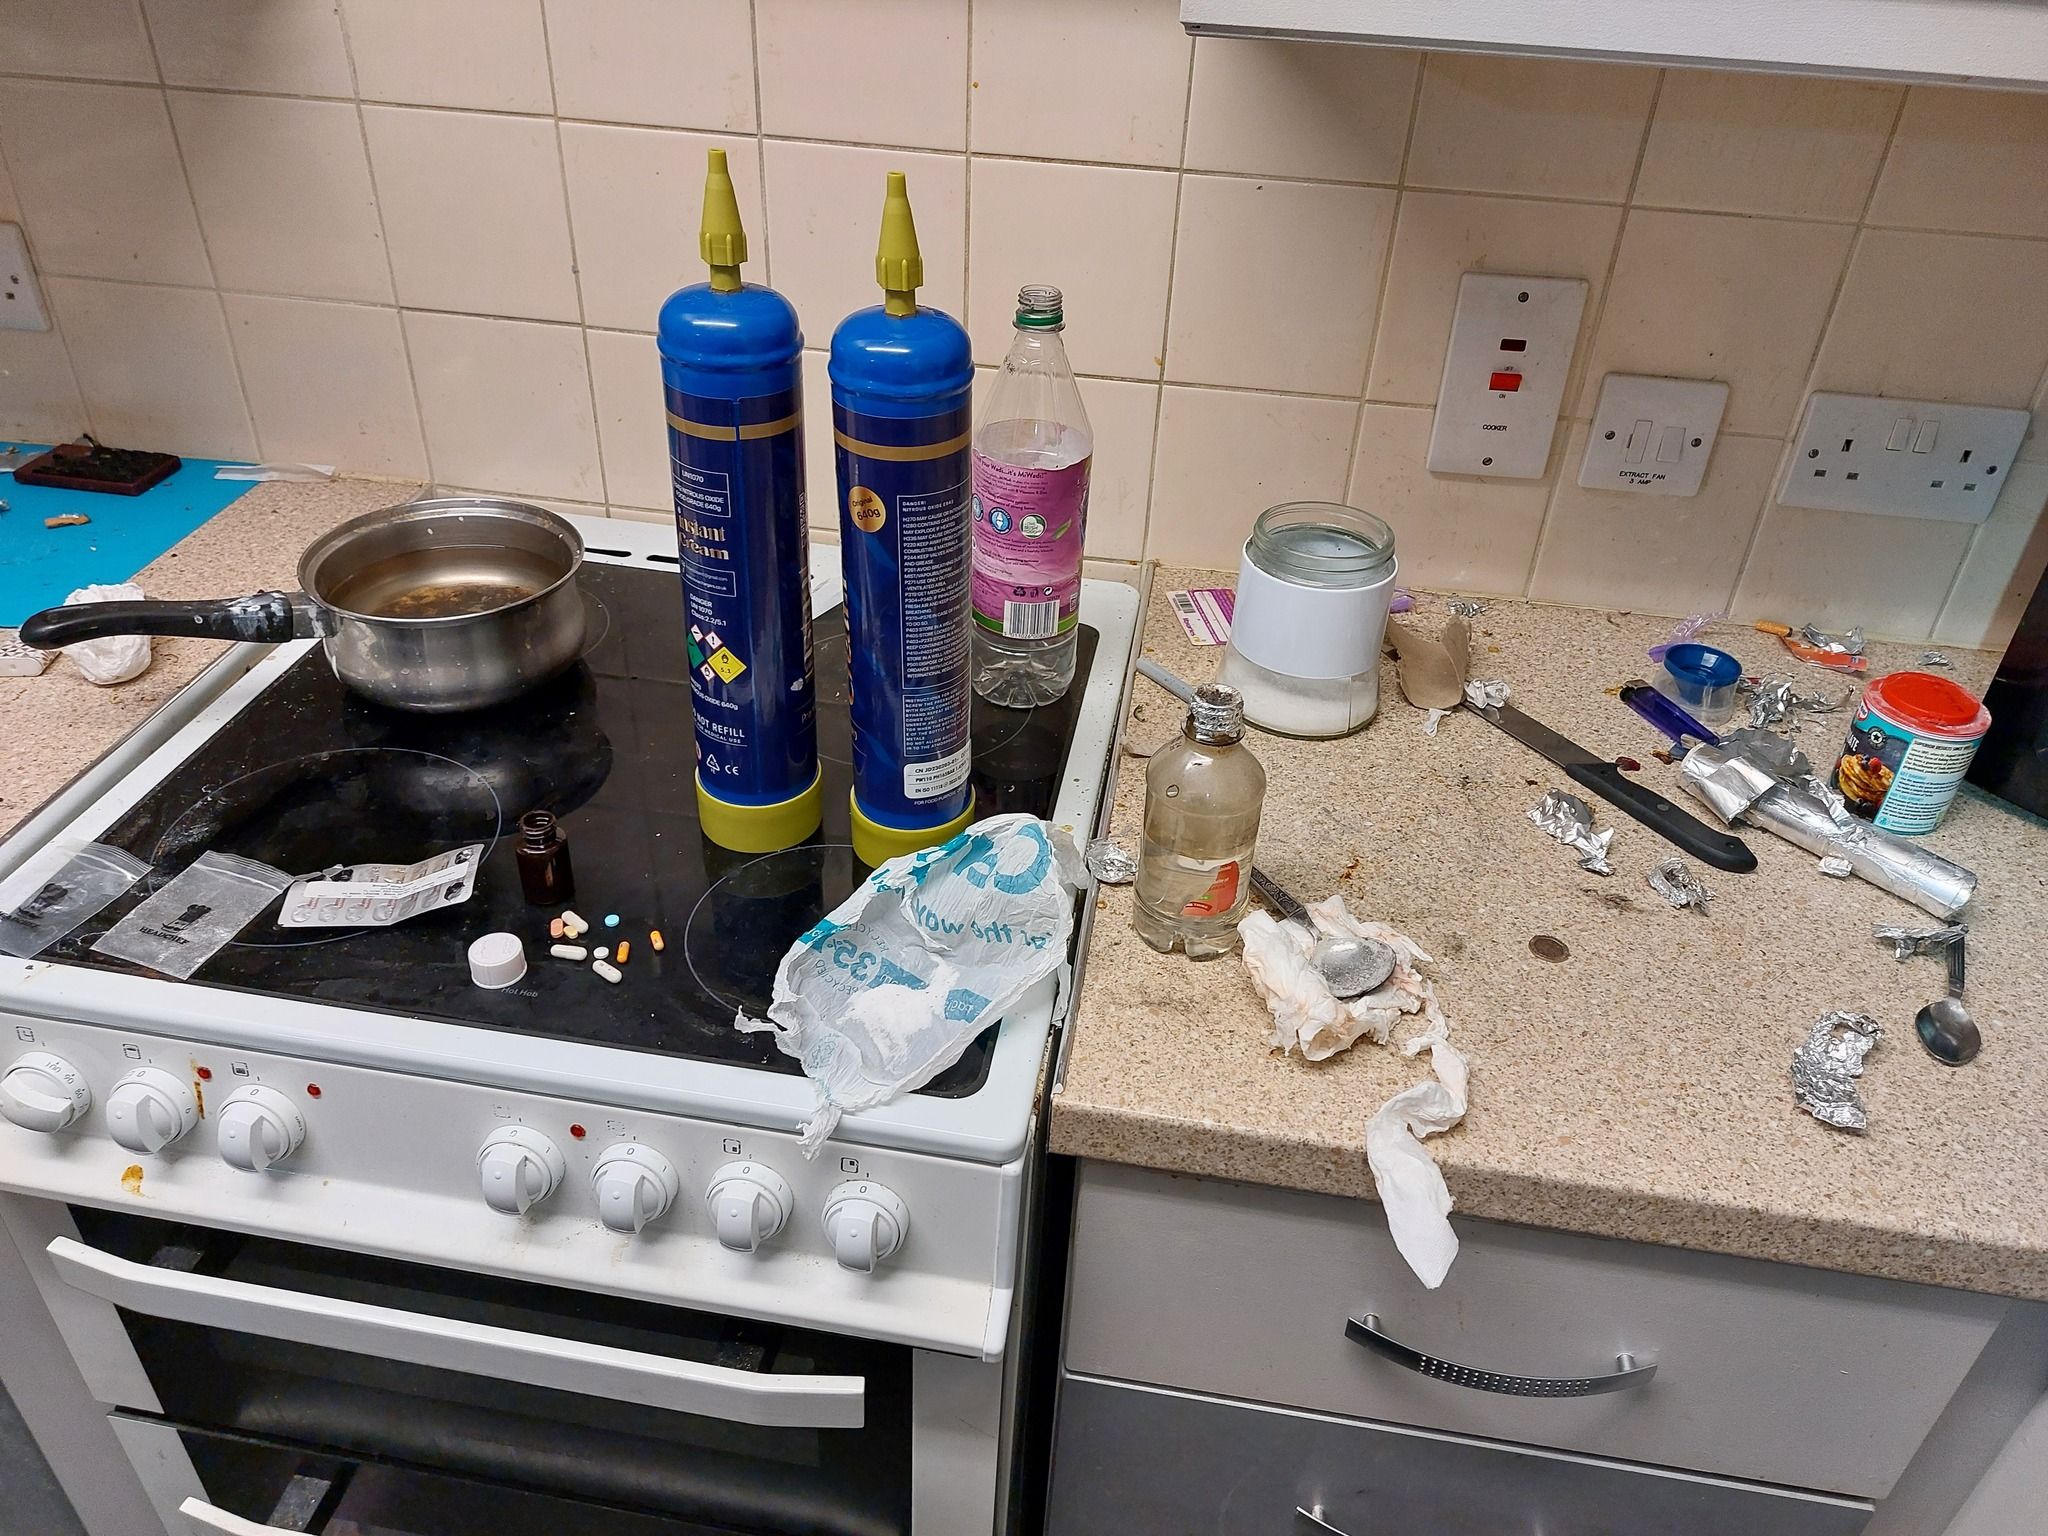 SCENE: Crack cocaine with Nitrous Oxide and illegal prescription drugs were found at a property in Dunmurry.